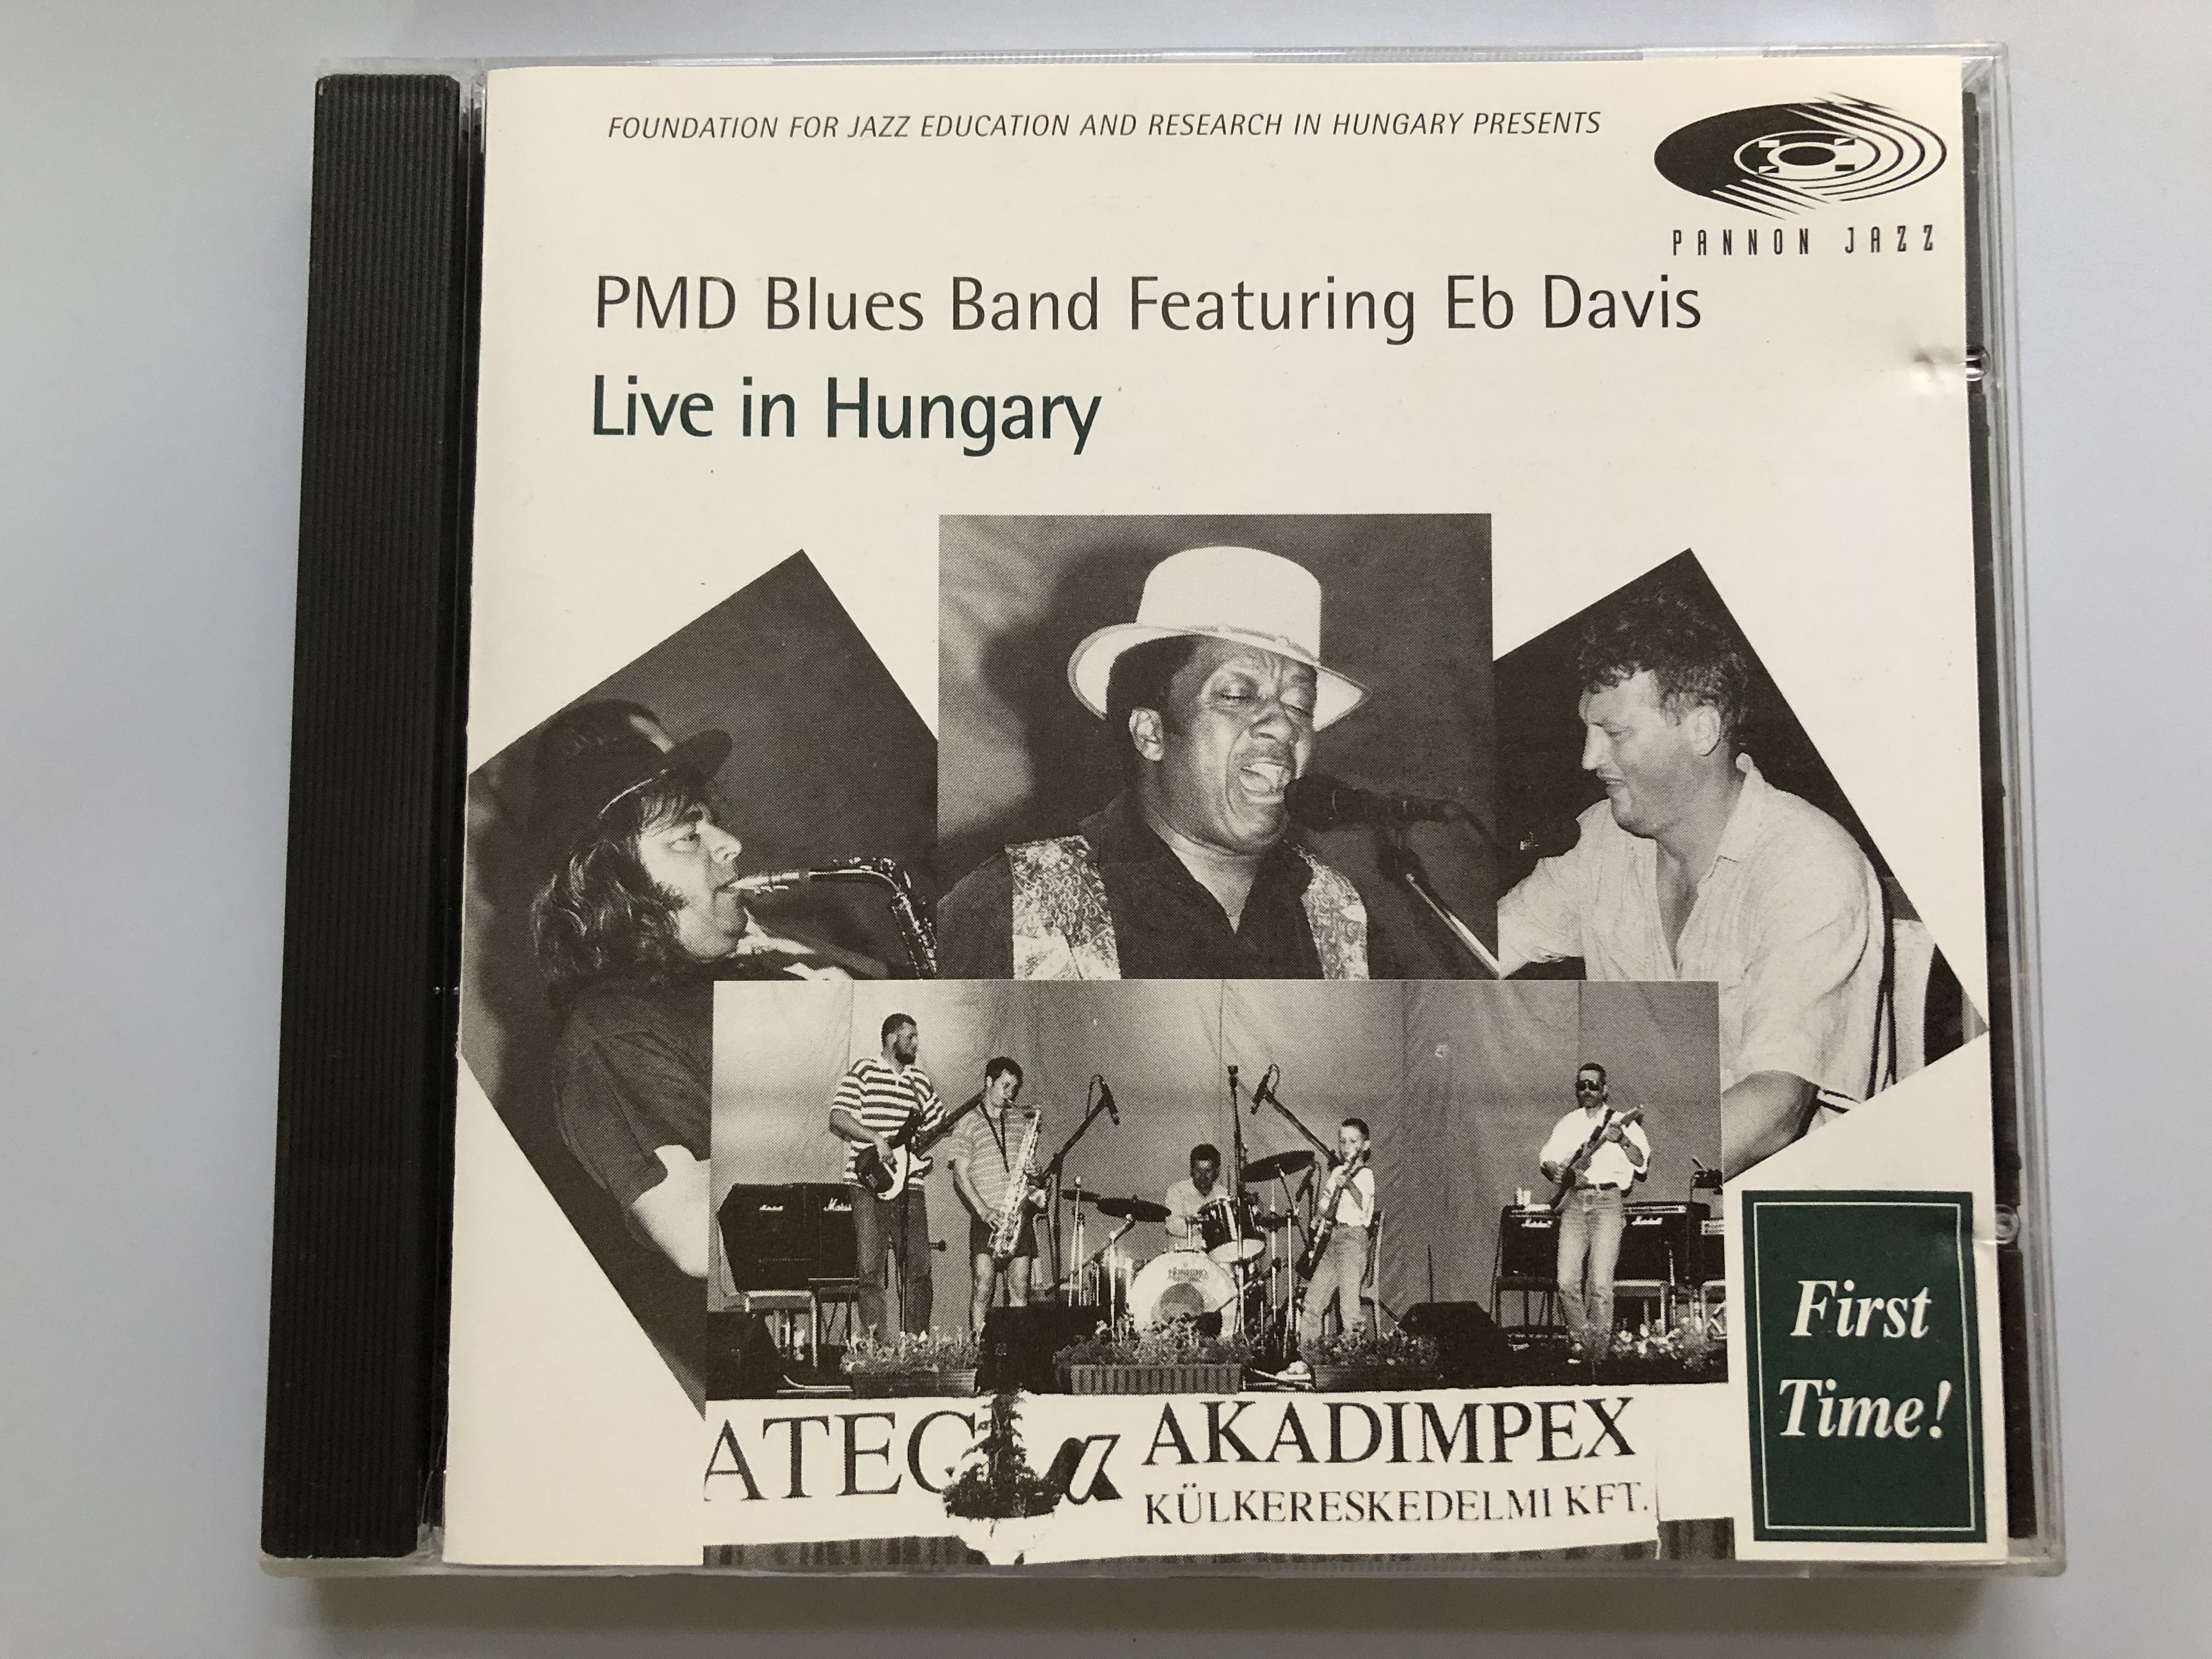 pmd-blues-band-featuring-eb-davis-live-in-hungary-foundation-for-jazz-education-and-research-in-hungary-presents-first-time-pannon-jazz-audio-cd-1996-pj-1014-1-.jpg